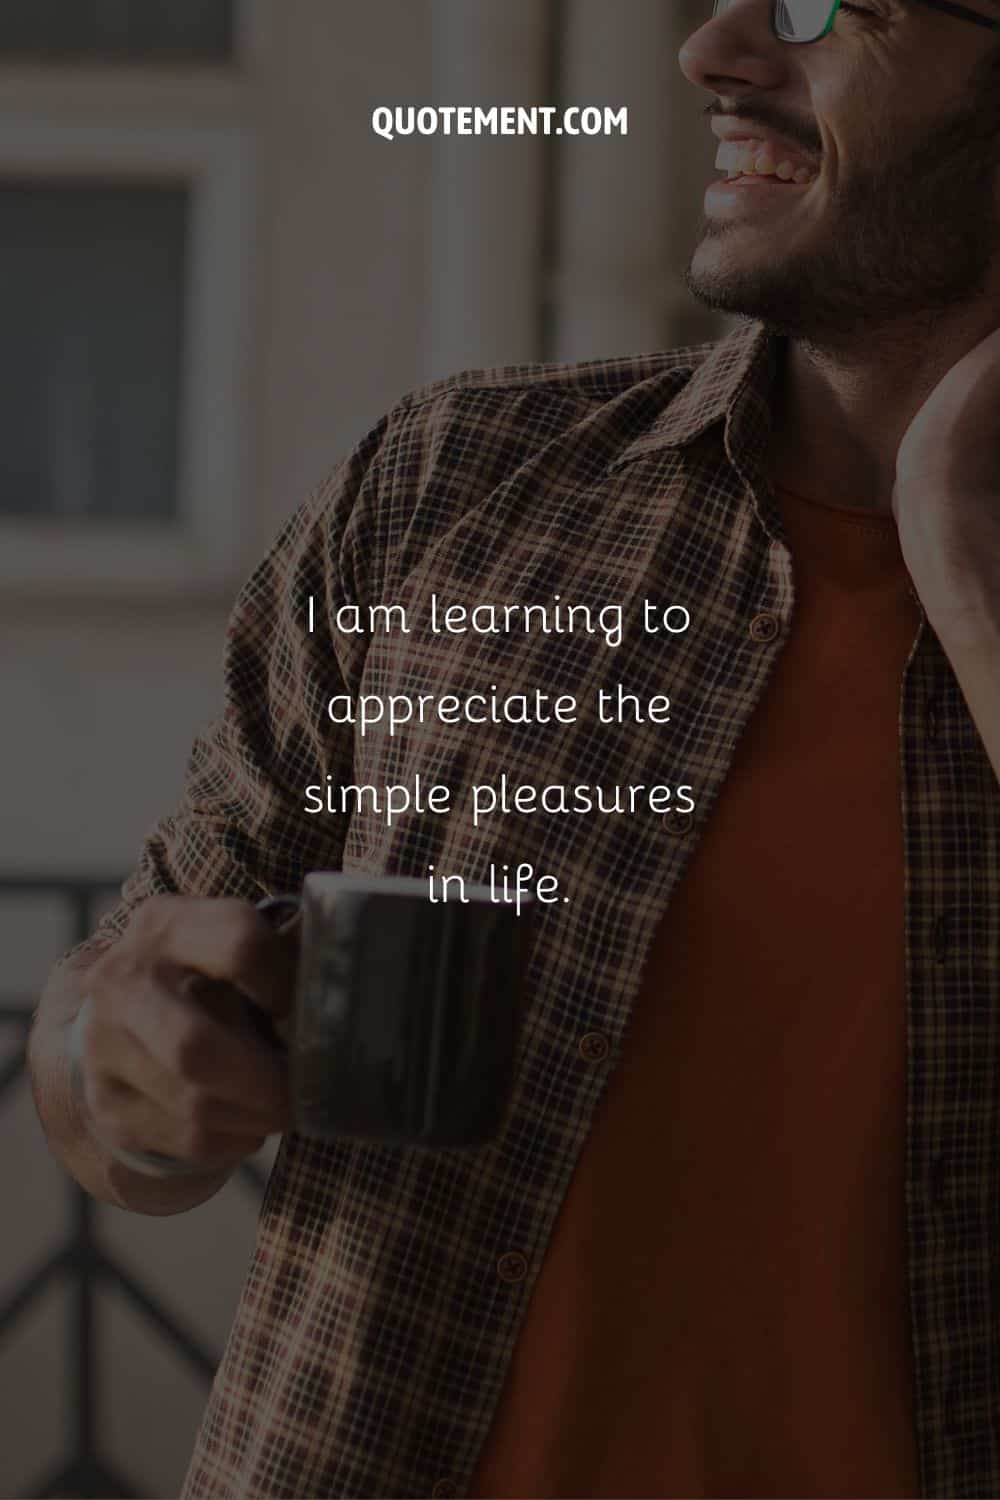 Image of a man holding a cup representing an affirmation for Wednesday.